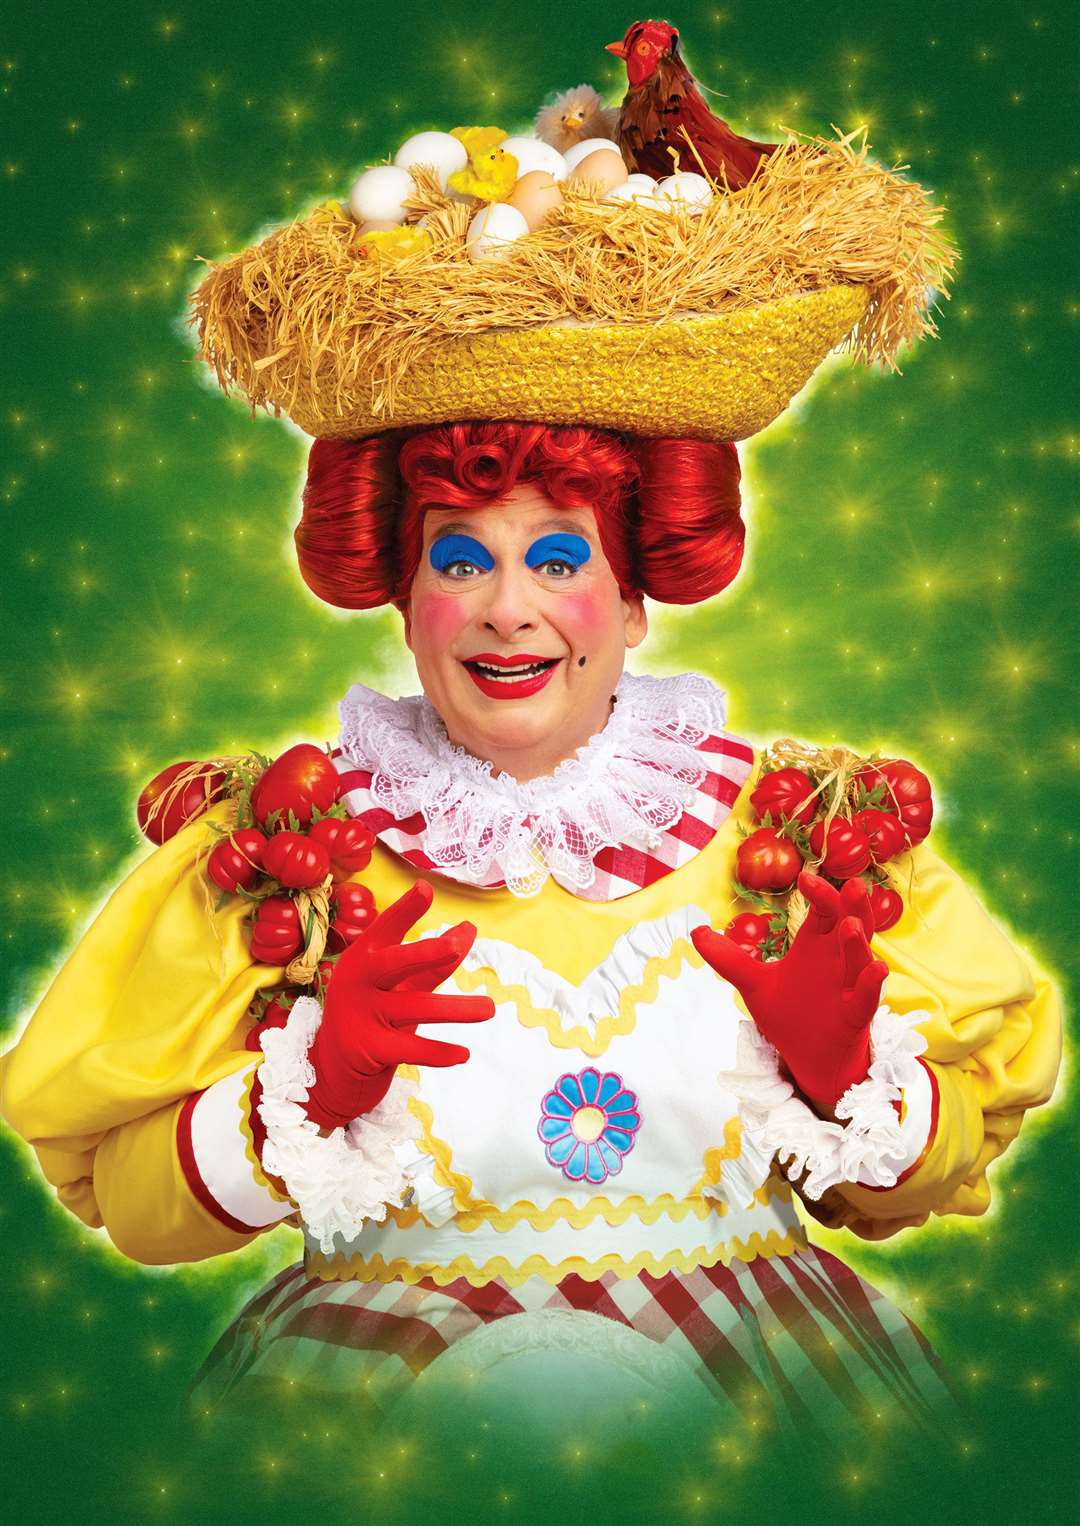 Christopher Biggins will star in this year's postponed pantomime at the Dartford Orchard Theatre in 2021